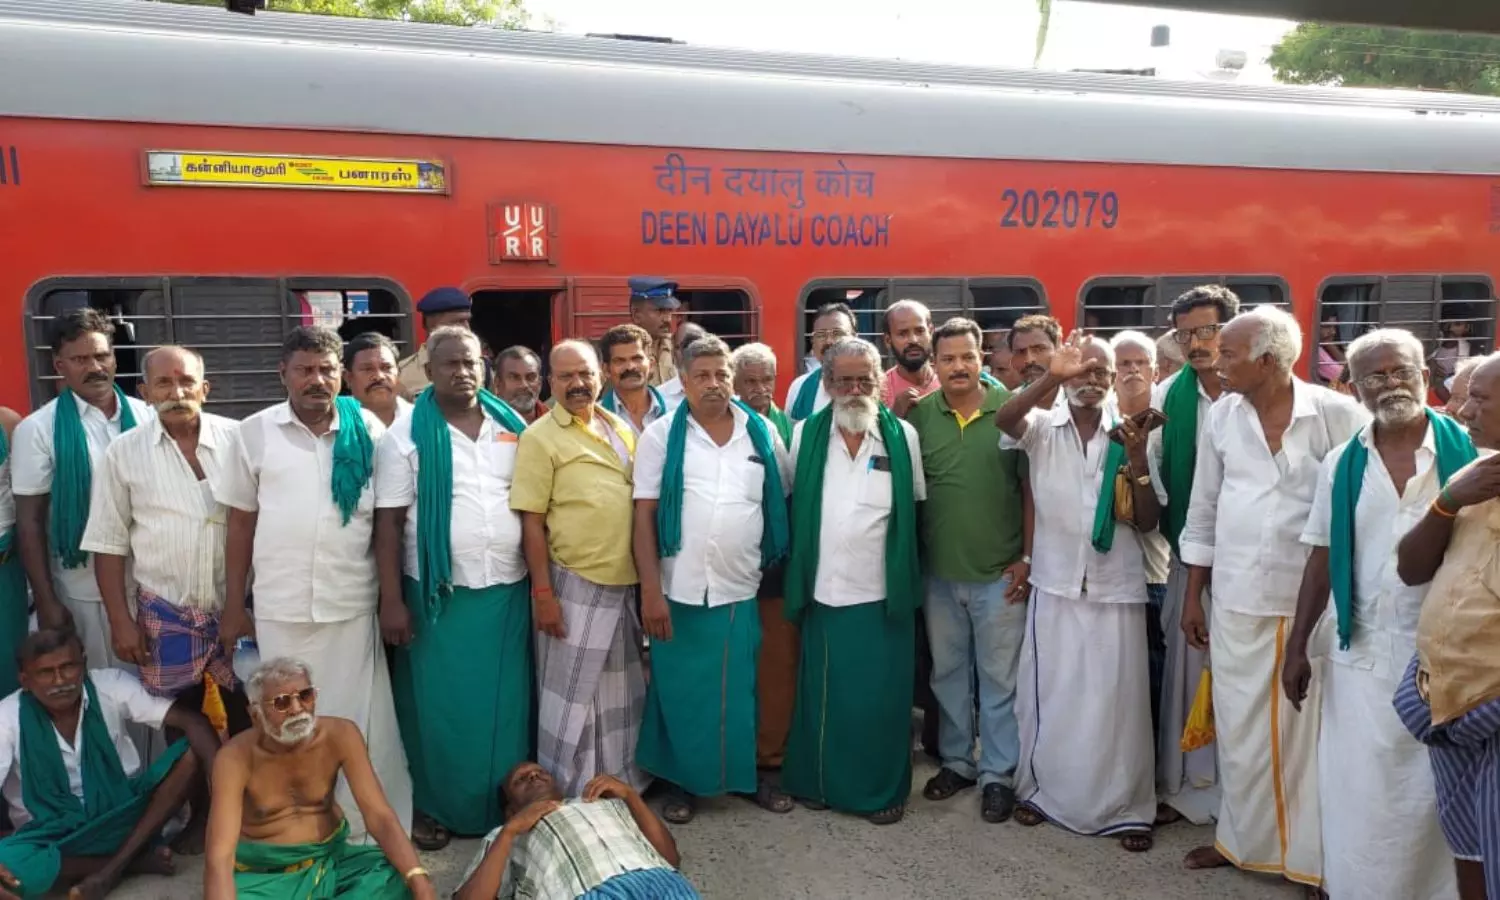 Delta farmers heading to Varanasi to contest against Prime Minister Modi deboarded from train